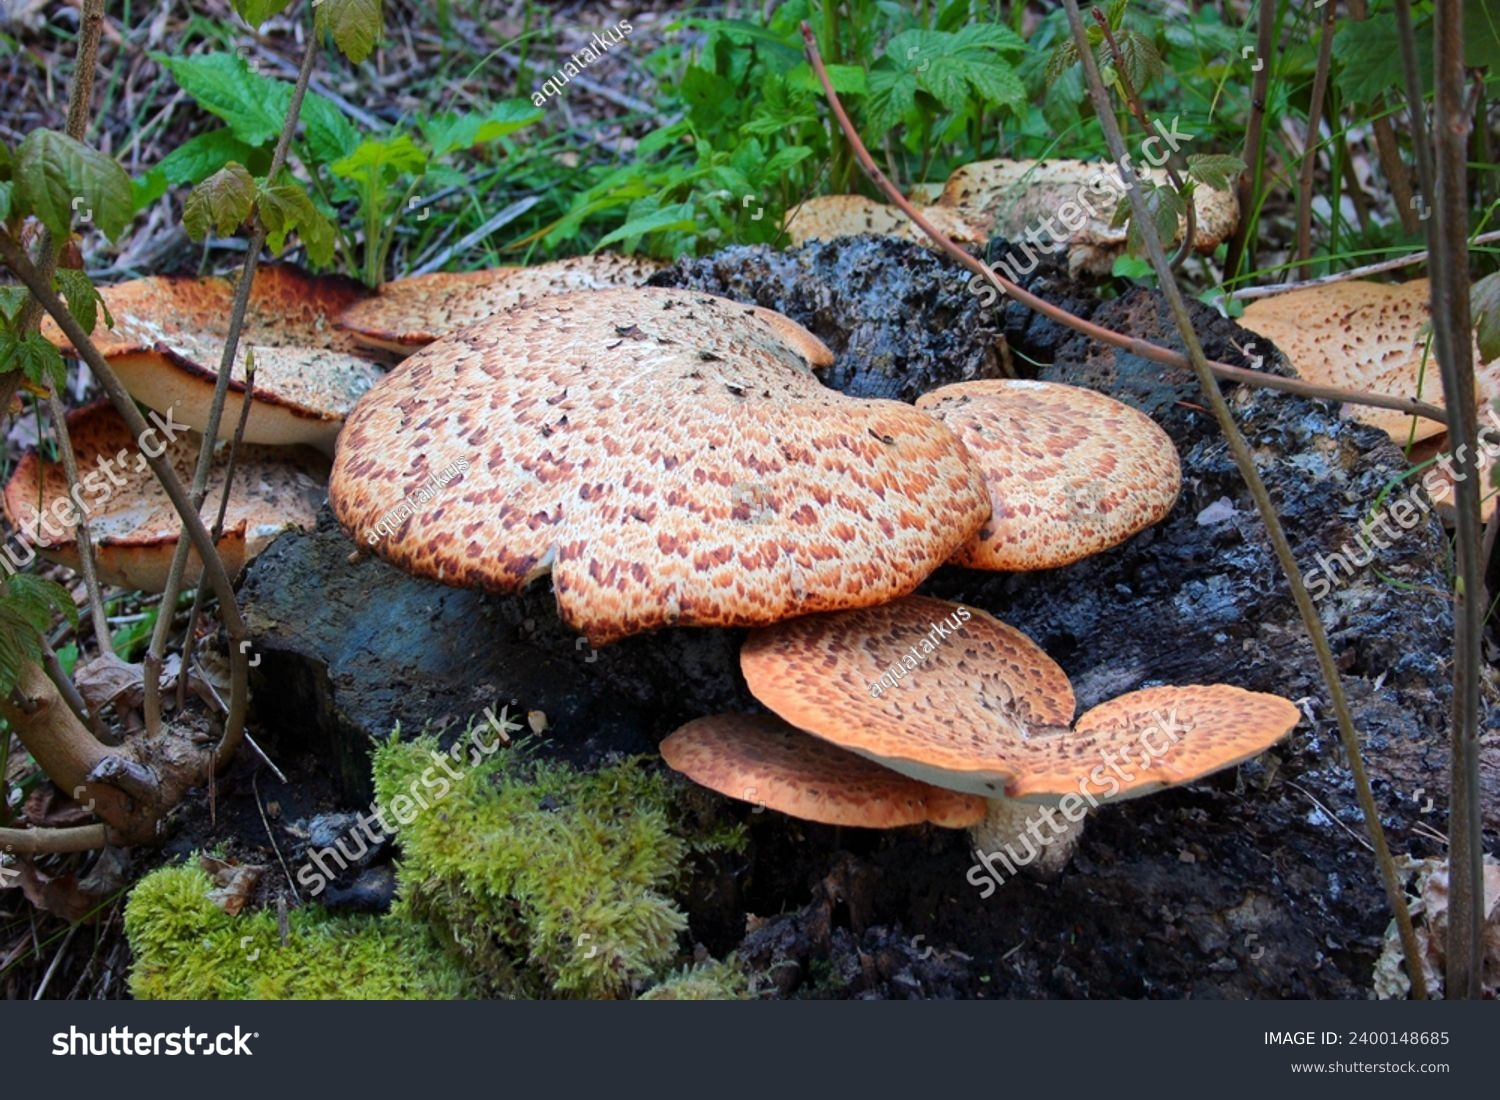 Cerioporus squamosus, commonly known as Dryad's saddle or Pheasant's back fungus on a tree #2400148685